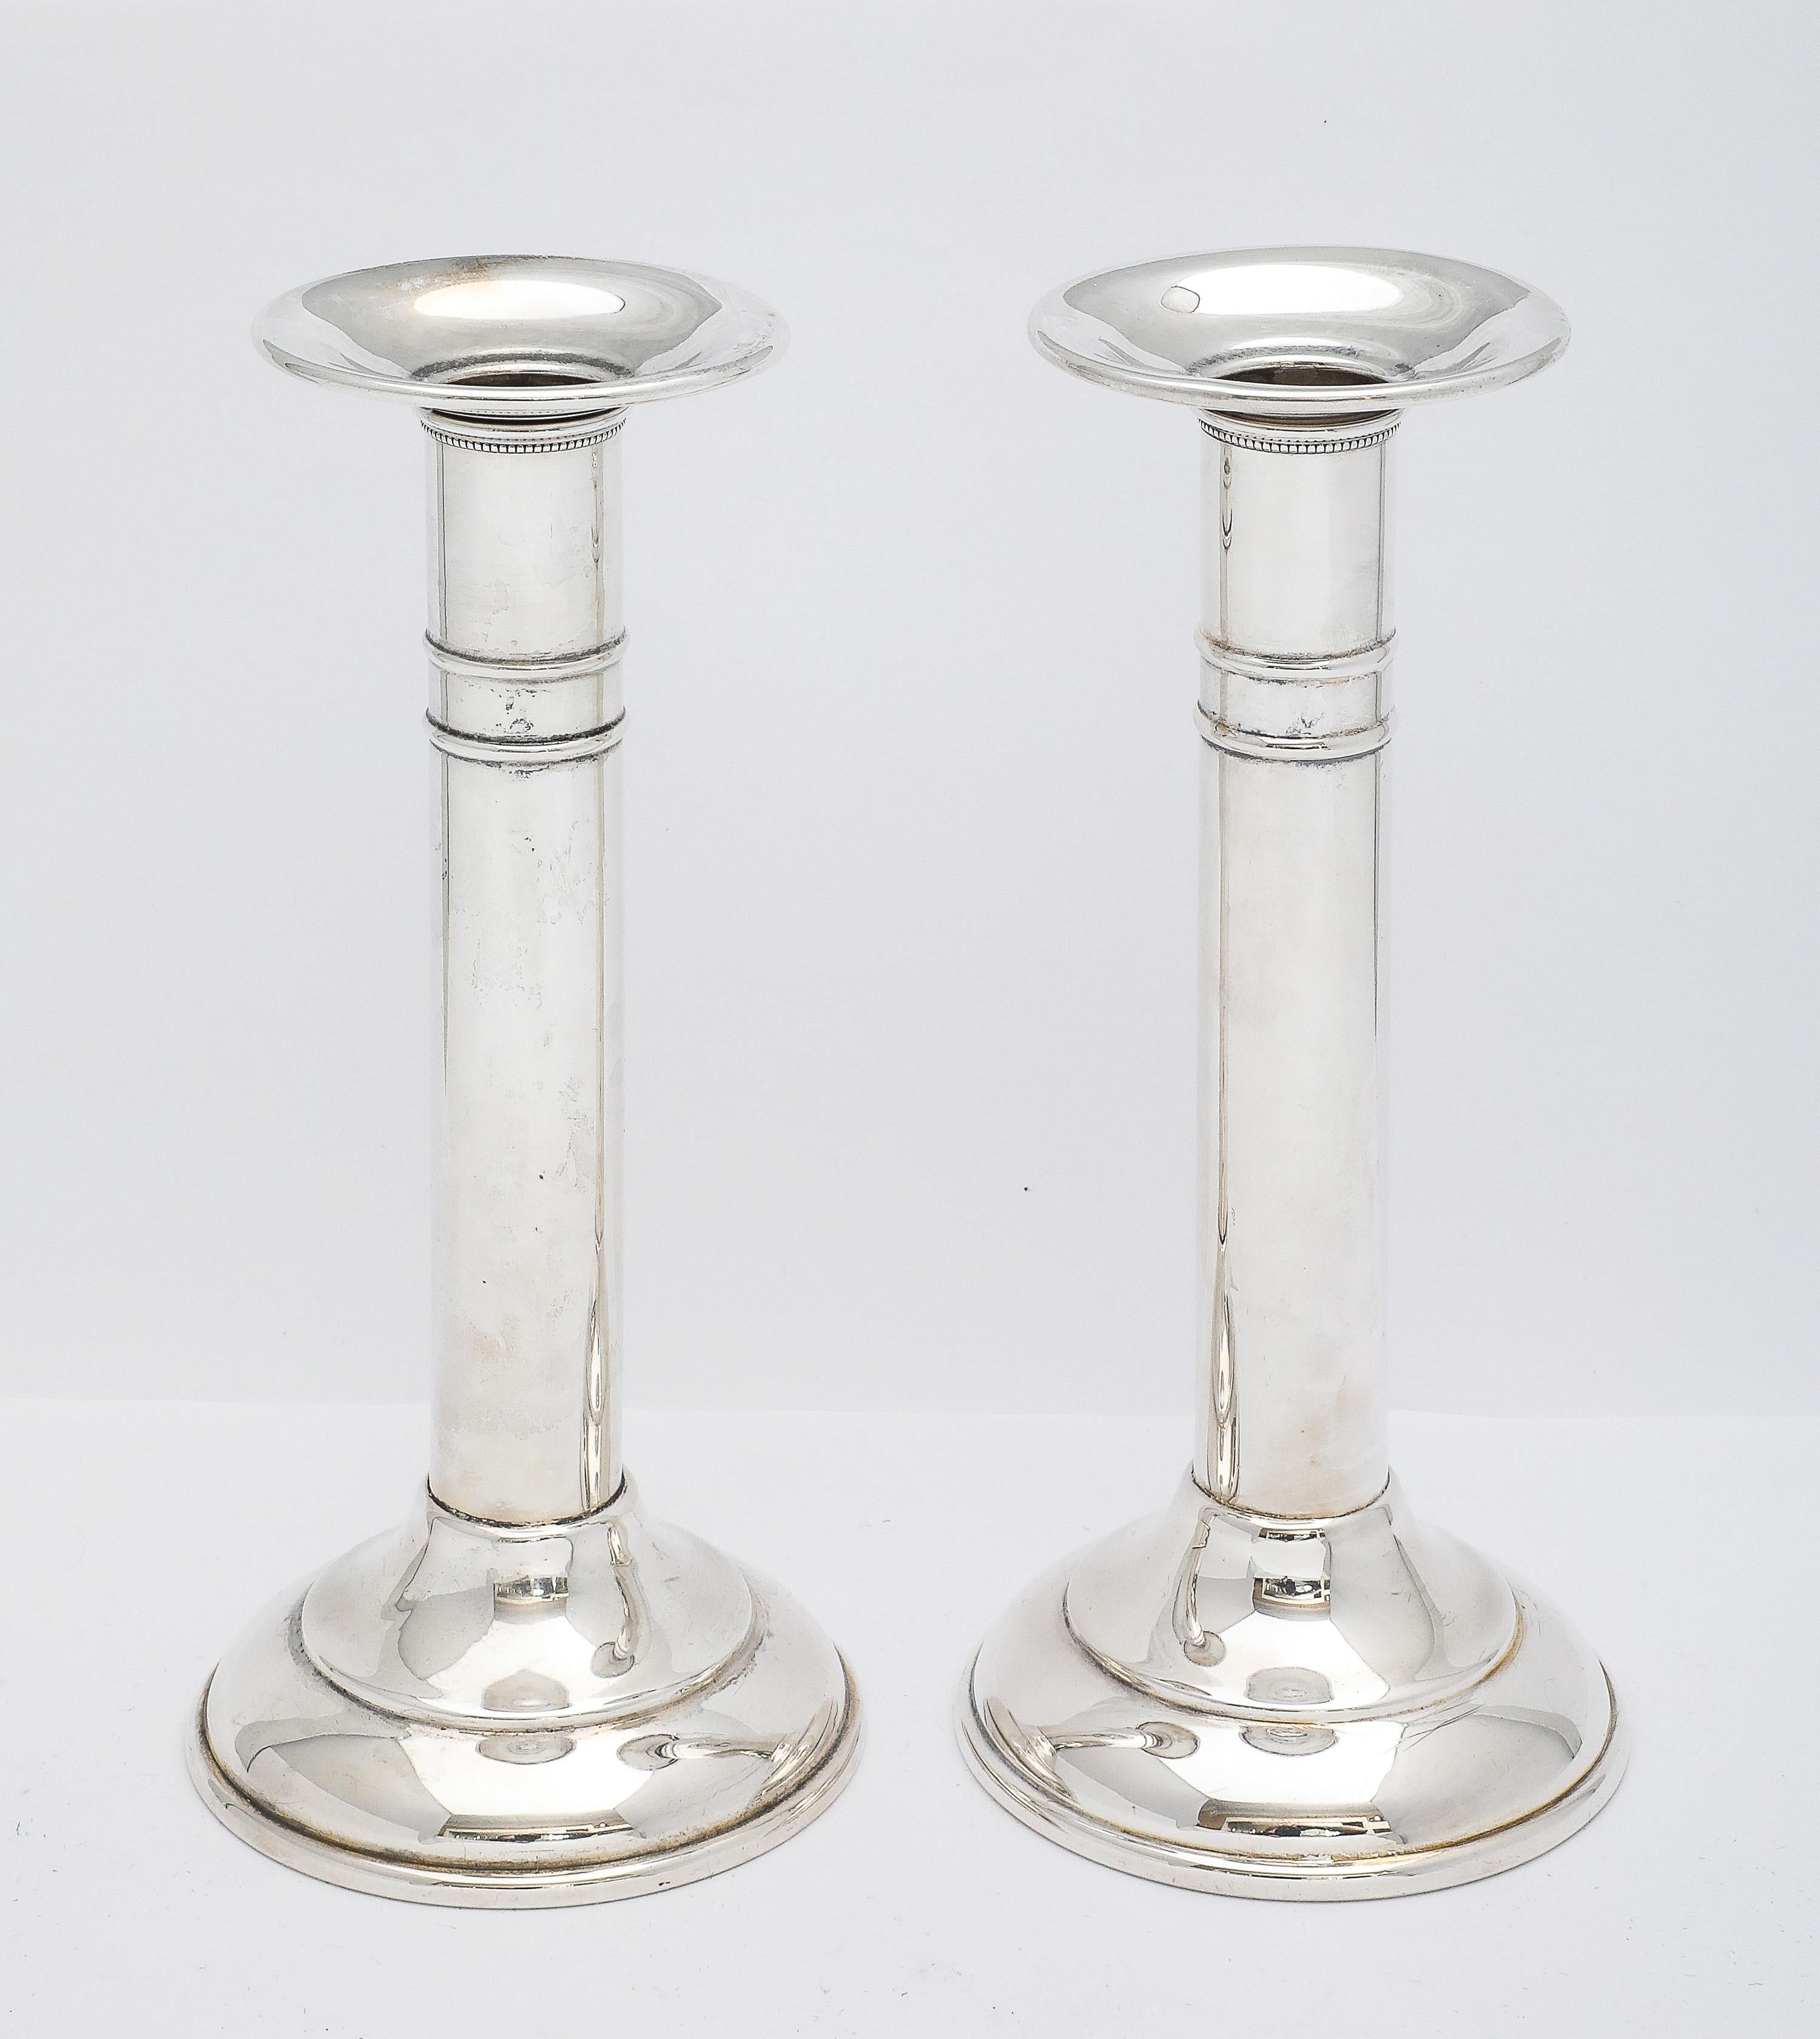 Pair of Edwardian Period Sterling Silver Candlesticks In Good Condition For Sale In New York, NY